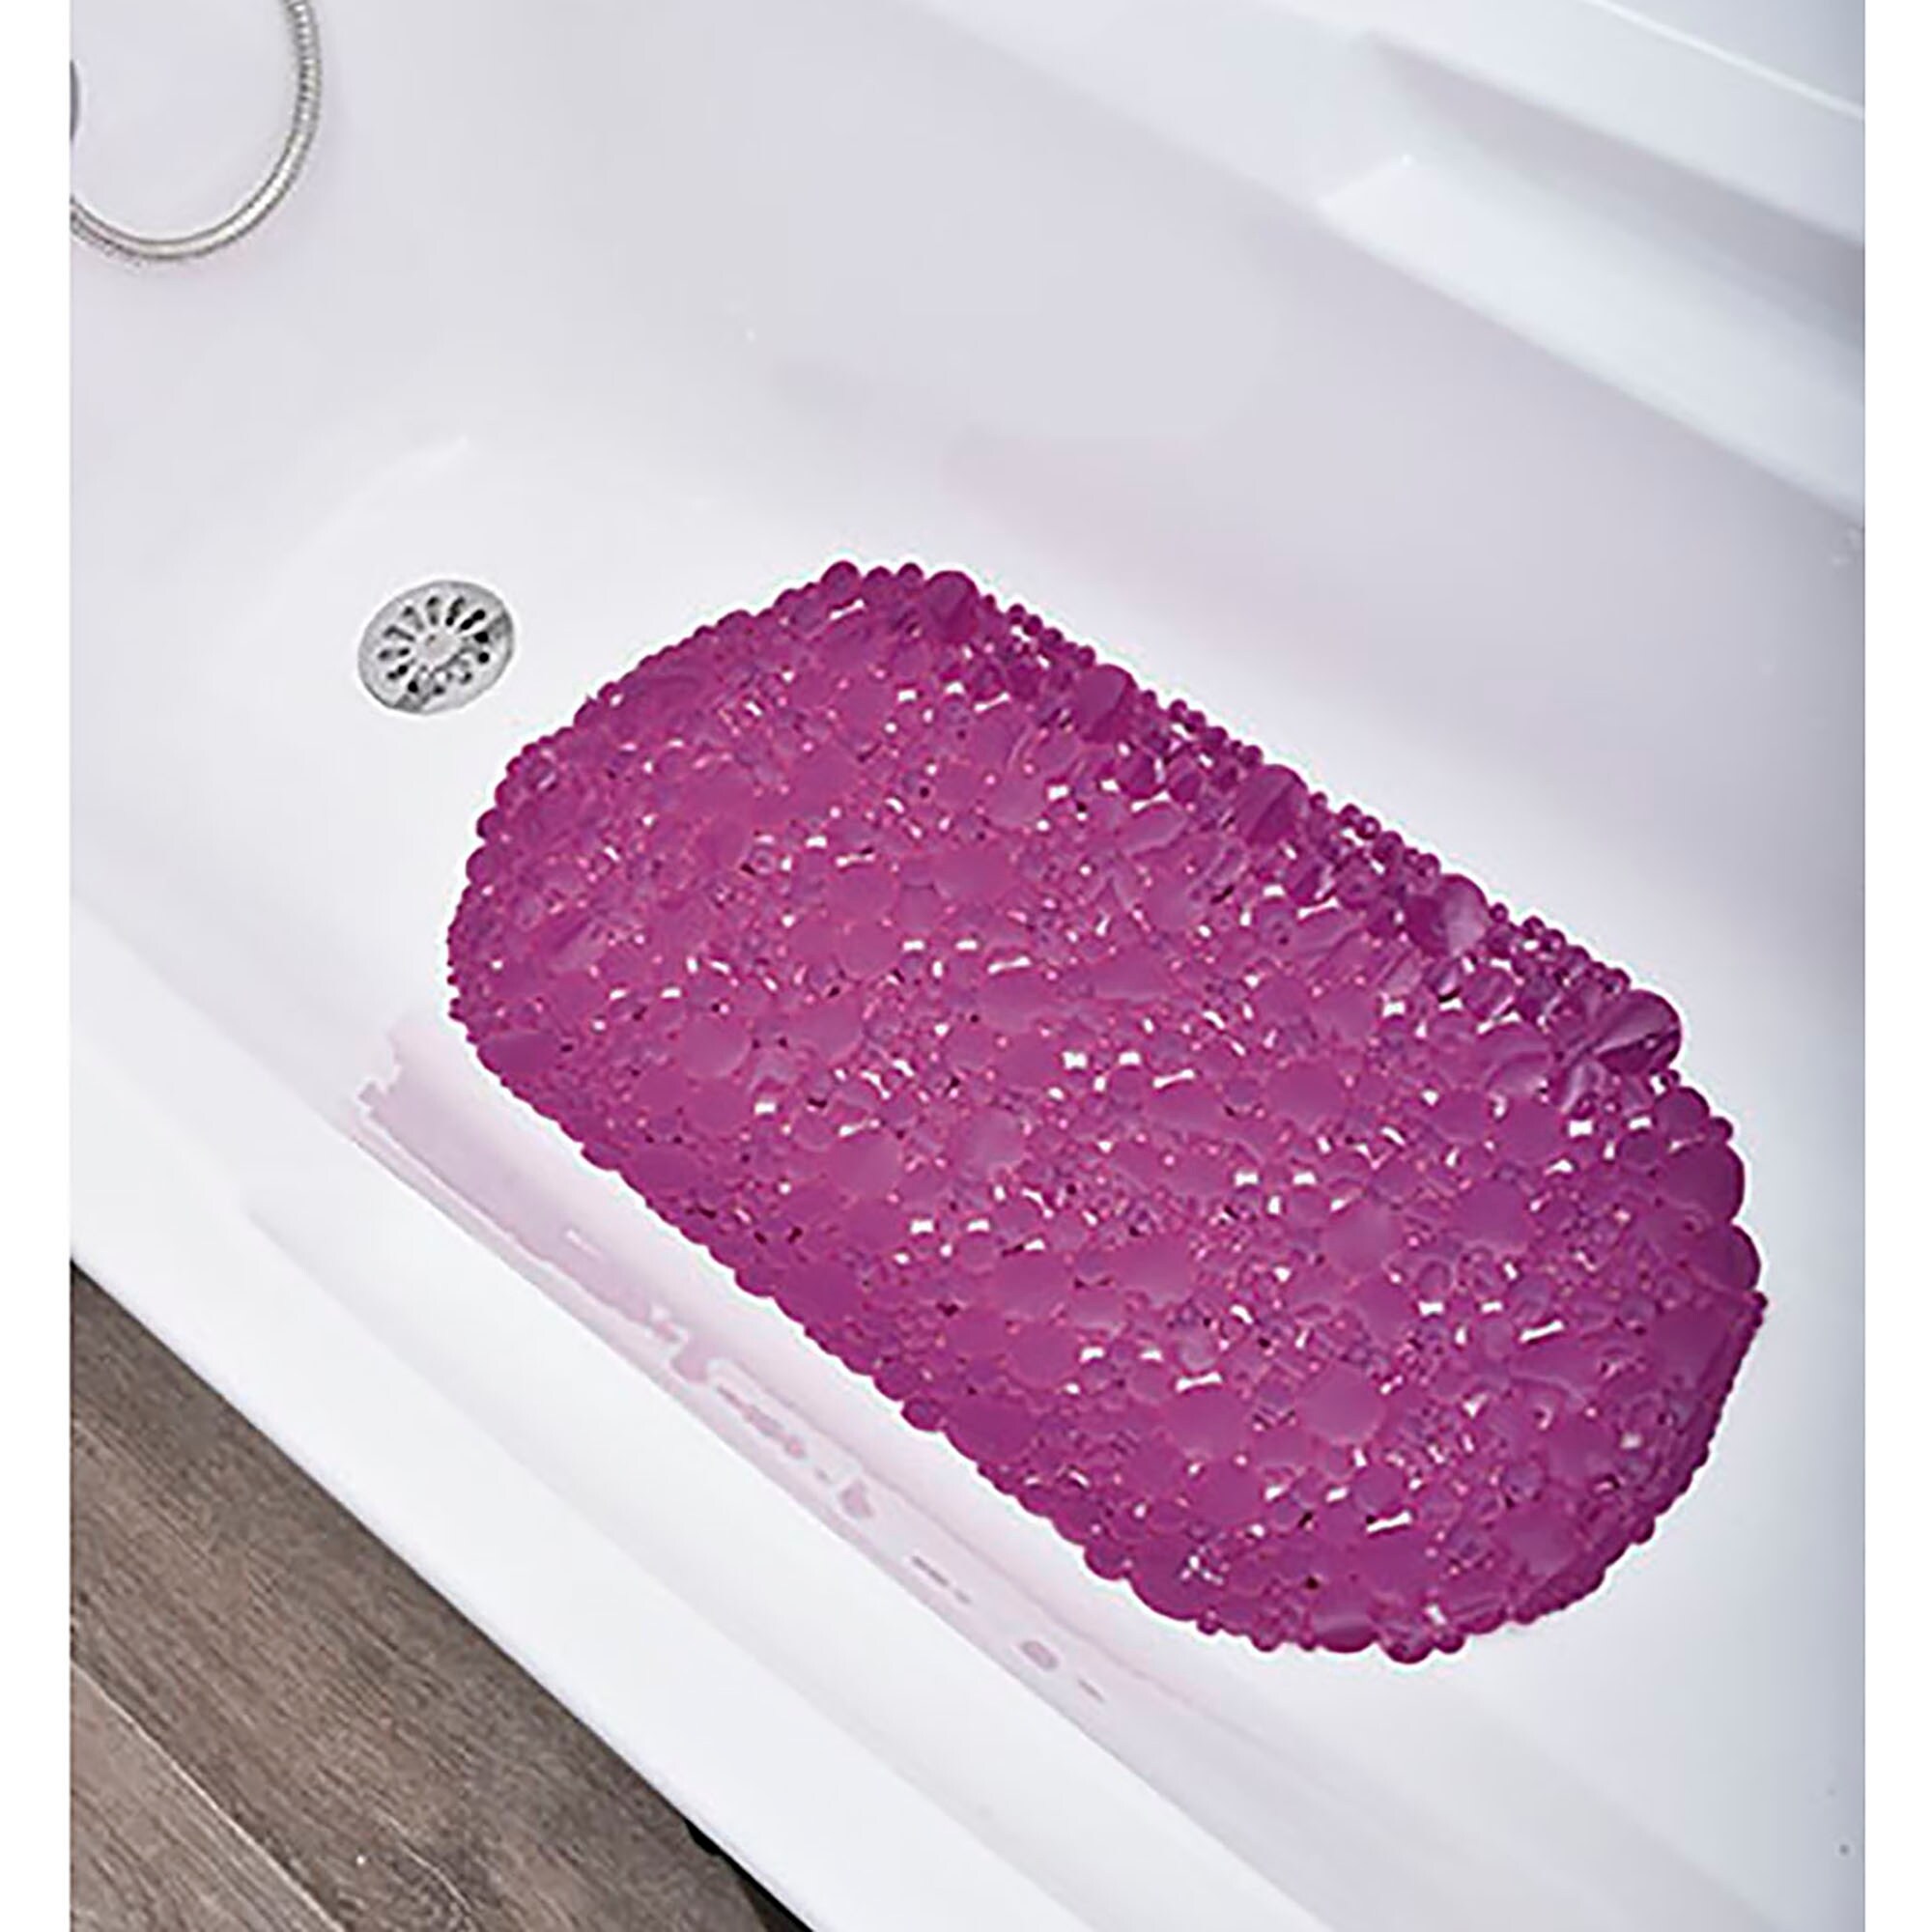 Beads Bathtub and Shower Mat - 27 x 14 Multicolored Waterproof